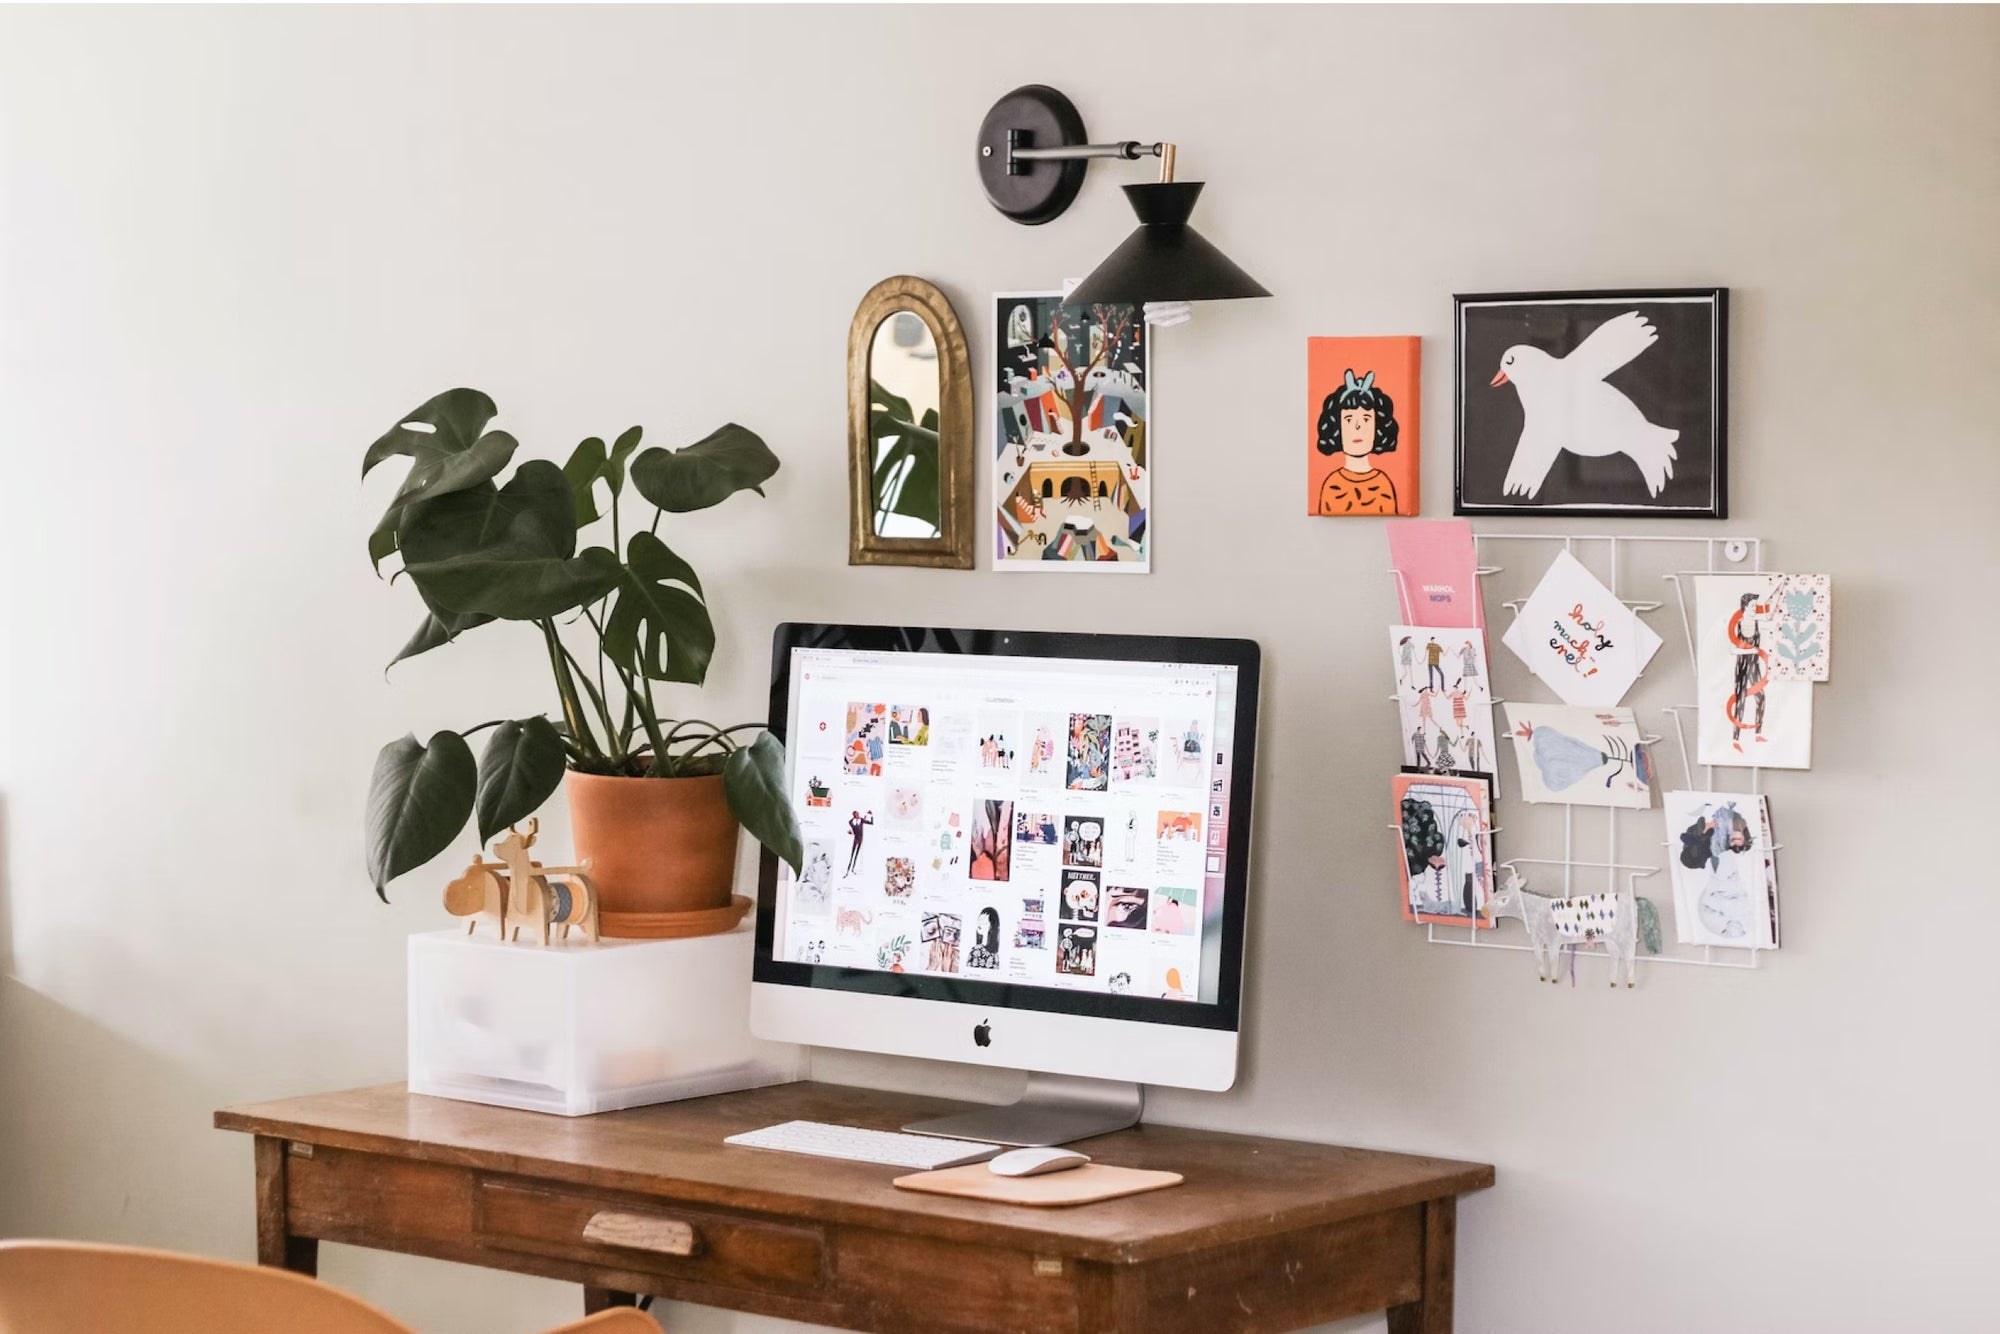 How To Decorate a Home Office